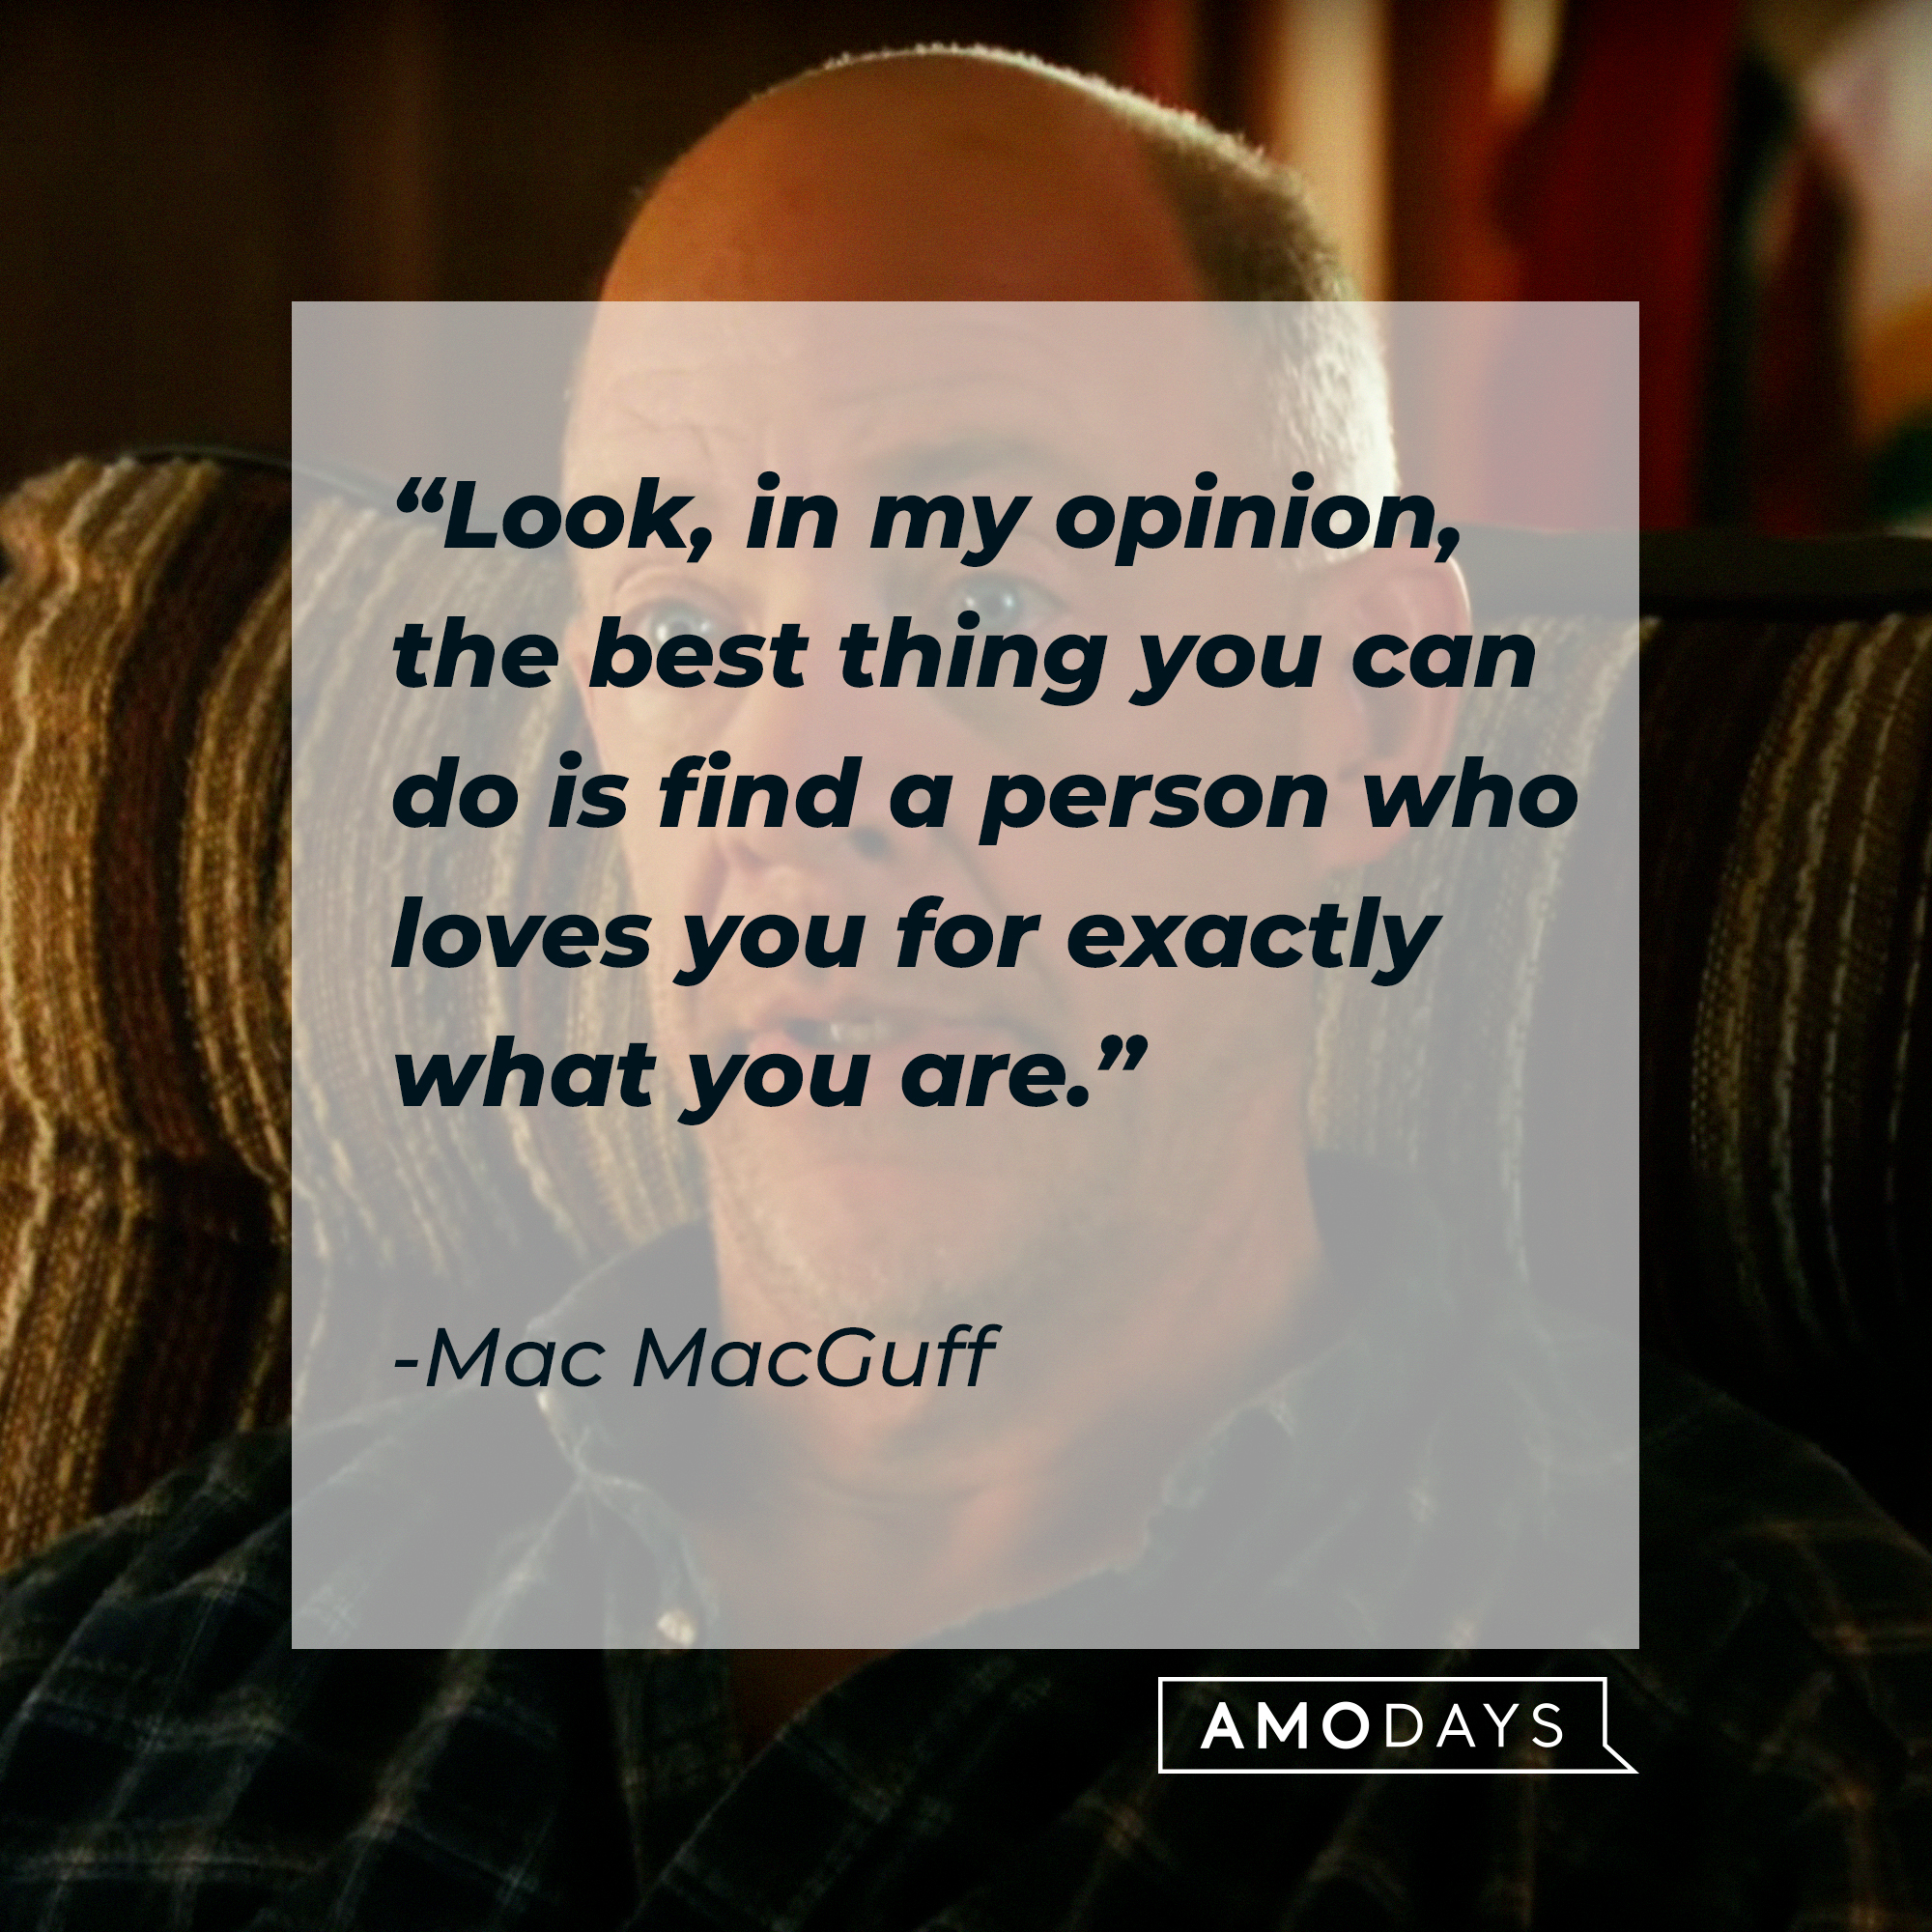 Mac MacGuff, with his quote: "Look, in my opinion, the best thing you can do is find a person who loves you for exactly what you are.” | Source: Facebook.com/JunoTheMovie